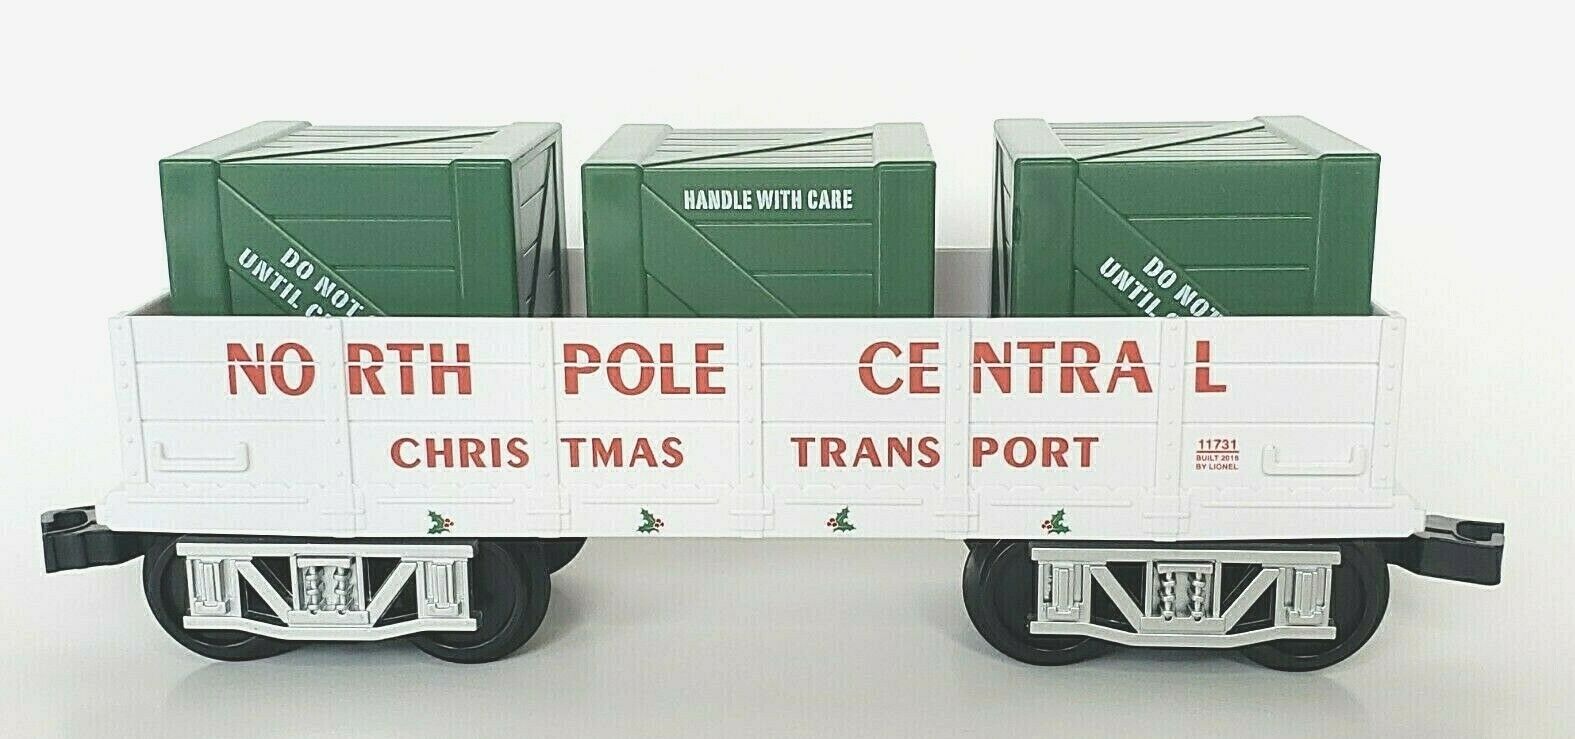 Lionel North Pole Central Ready To Play Gondola Train Replacement Add On 7-11729